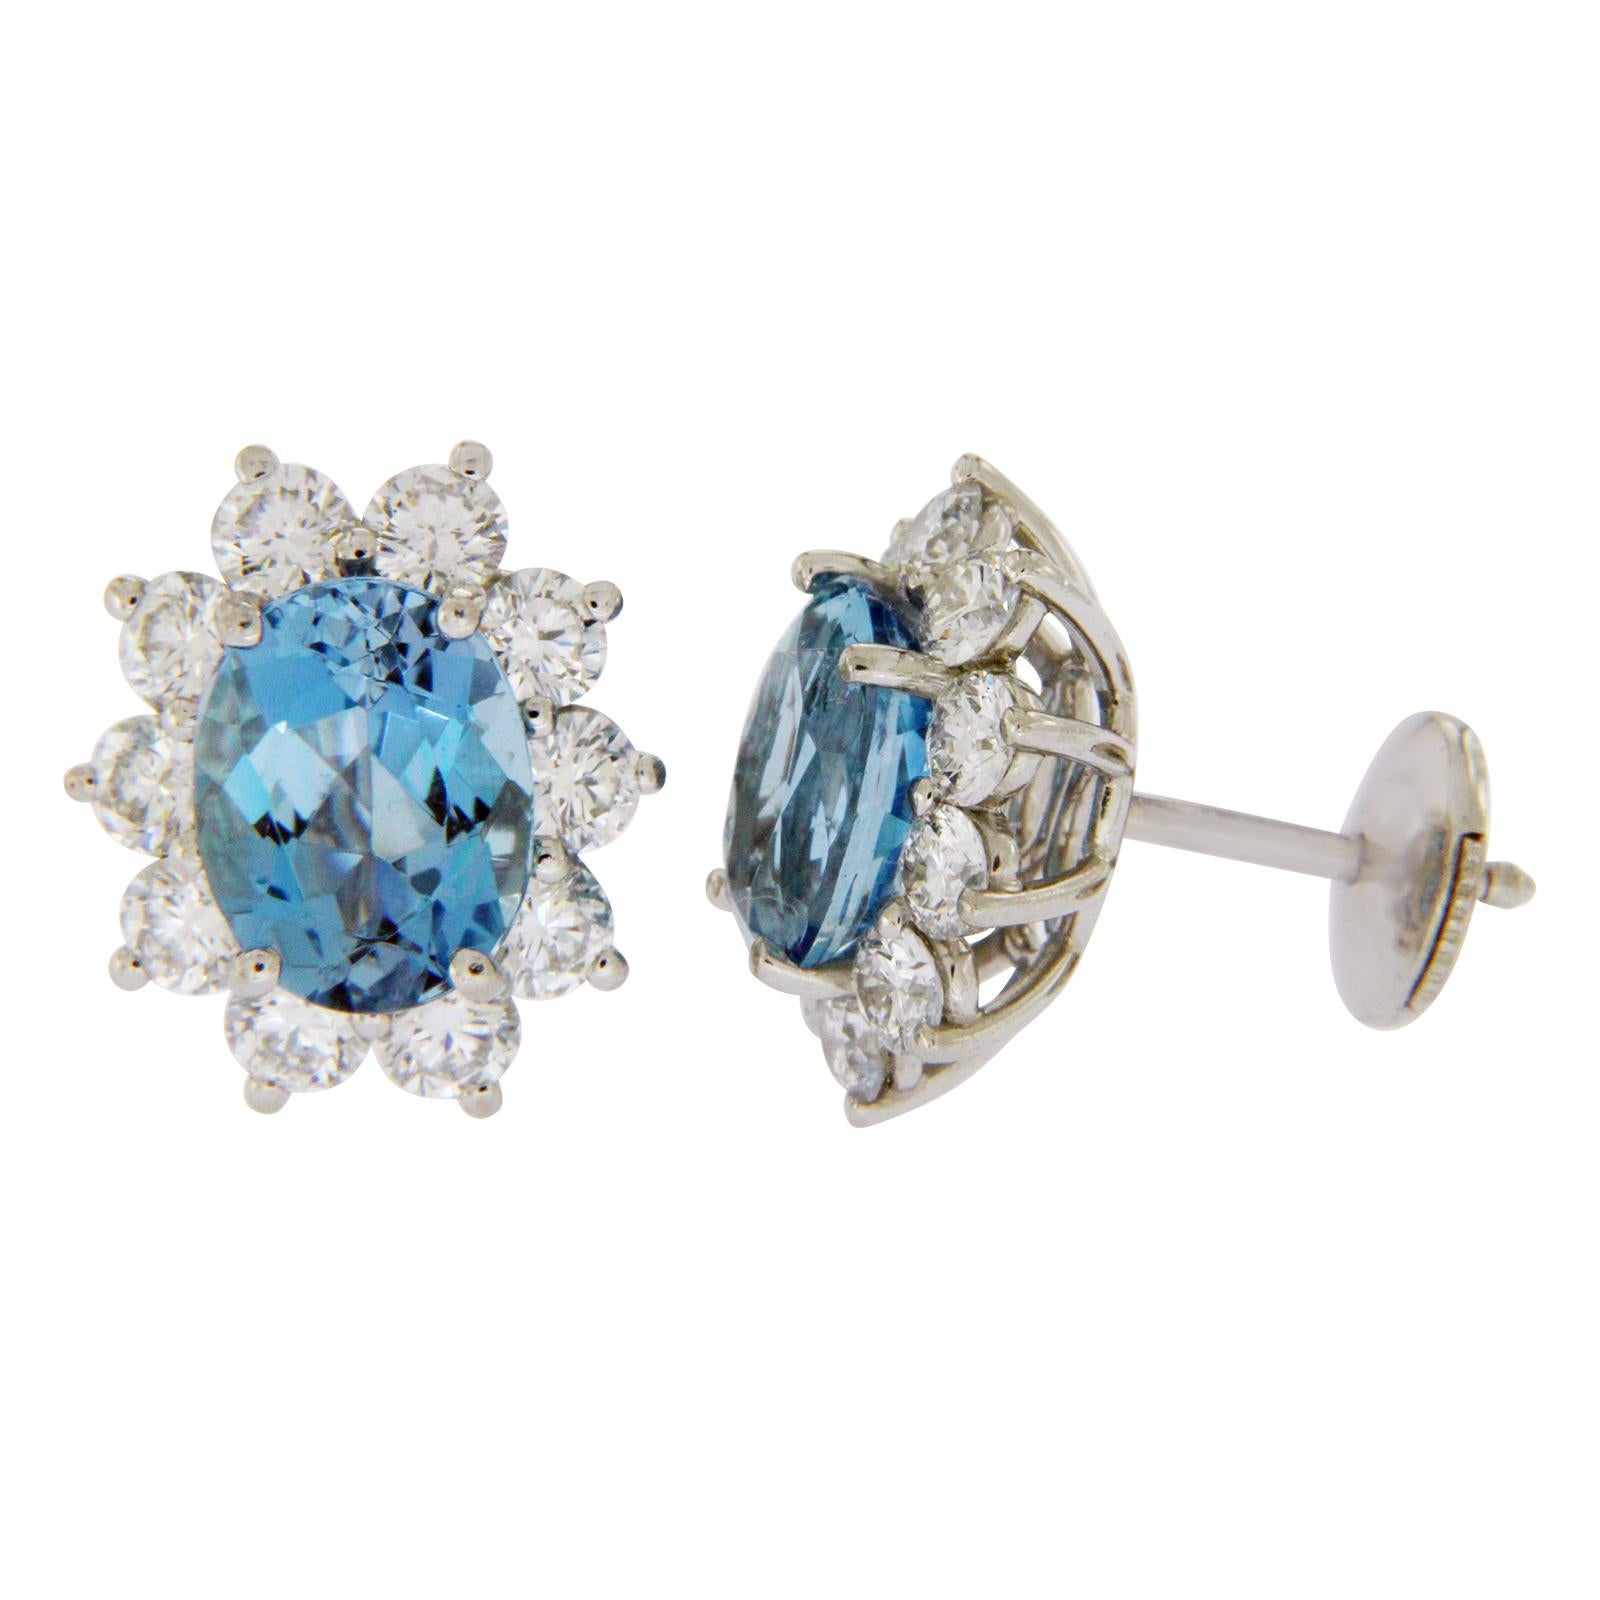 Type: Earrings
Height: 14 mm
Width: 12.5 mm
Metal: Platinum
Metal Purity: 950
Hallmarks: T and Co 950
Total Weight: 6.8 Grams
Stone Type: Aquamarines and Diamonds
Condition: Pre Owned
Stock Number: BO3